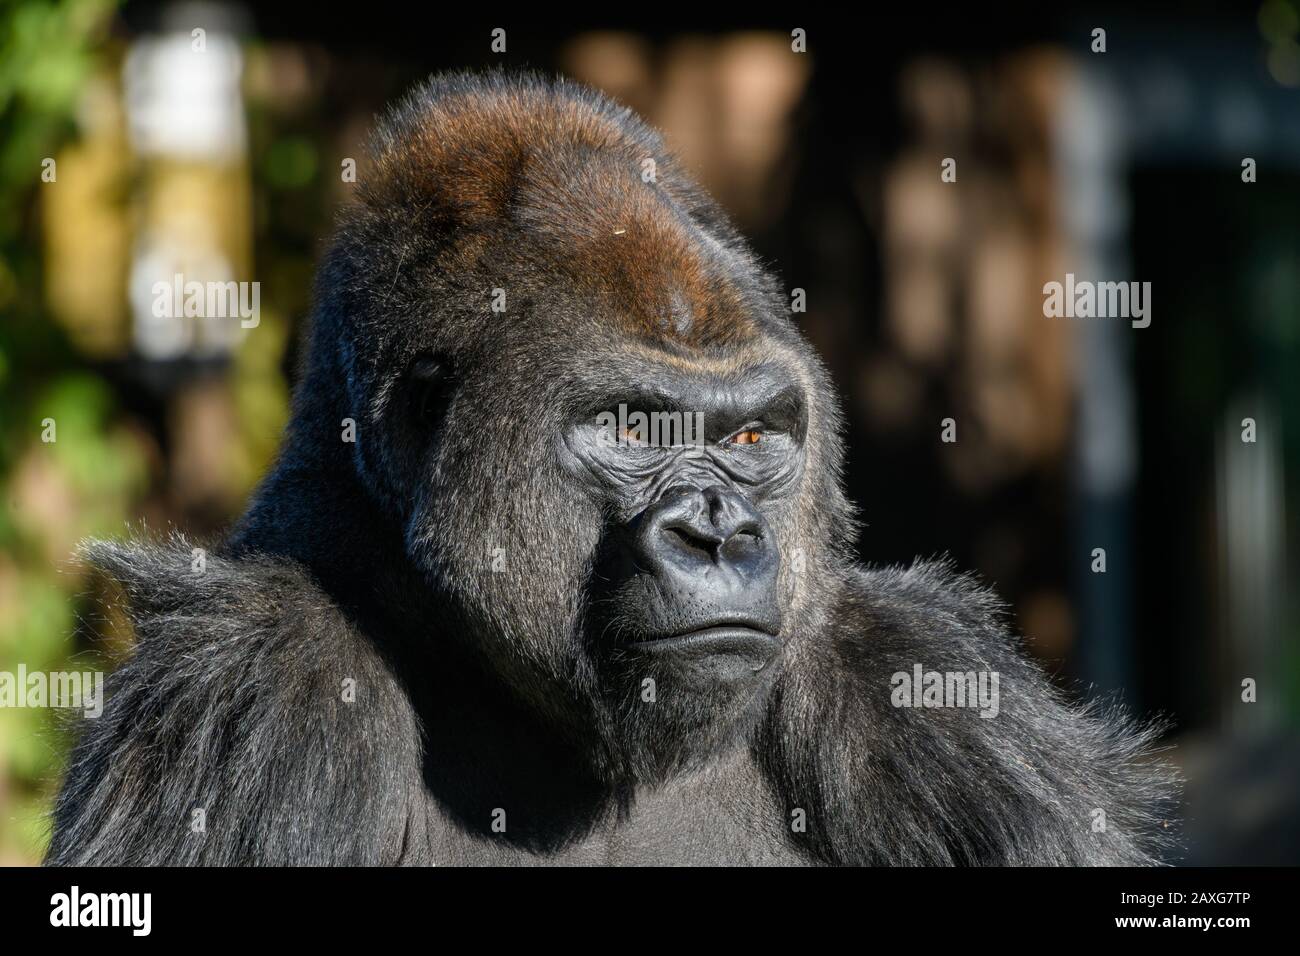 western Lowland Gorilla (Gorilla, gorilla, gorilla) with strong, intense look on face Stock Photo